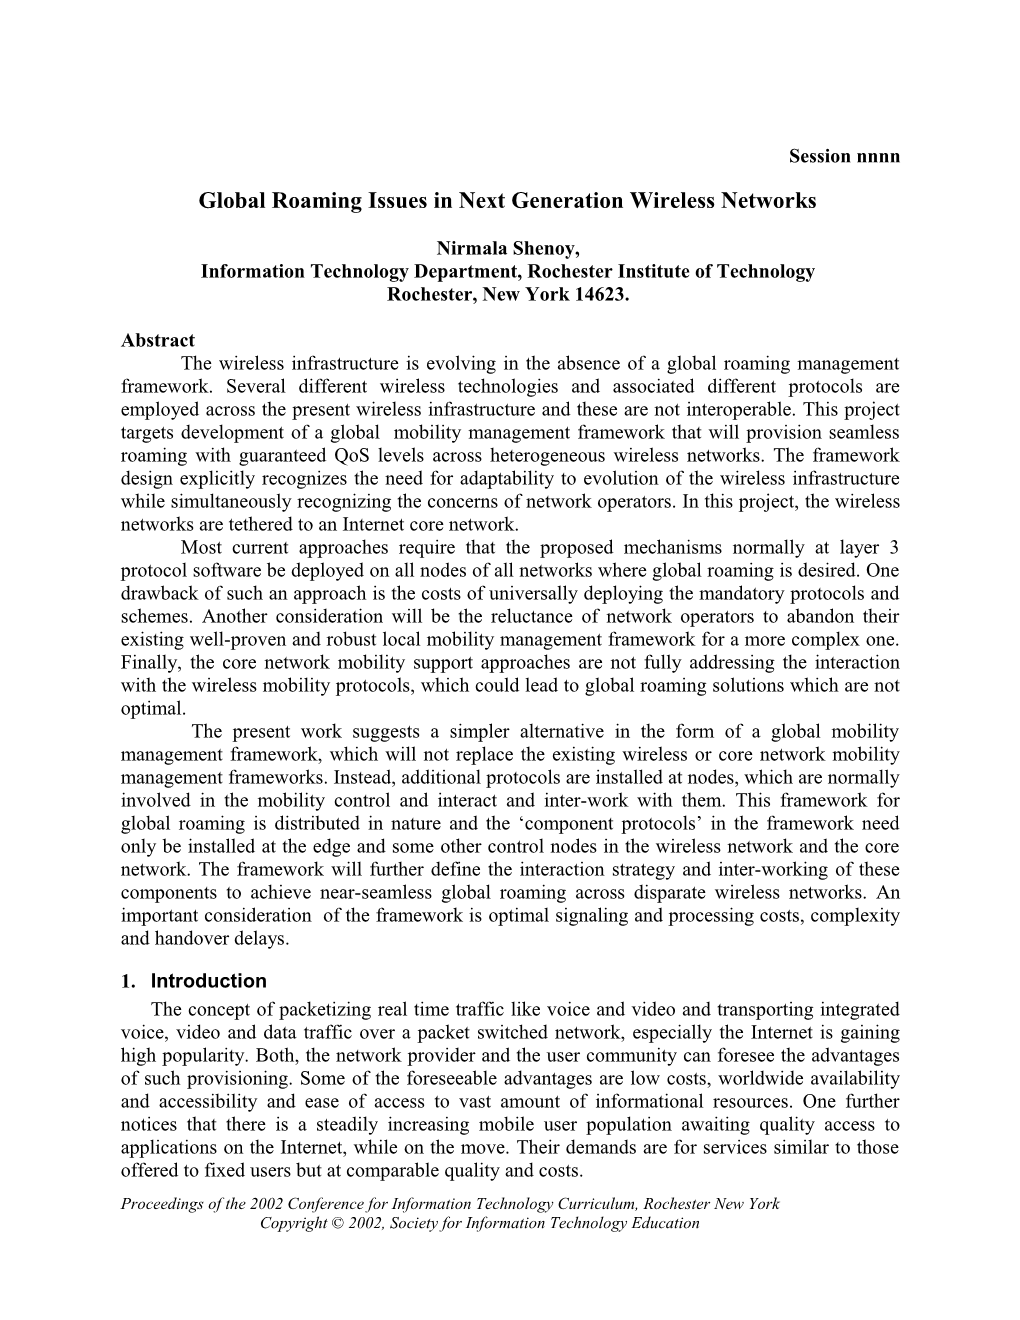 Global Roaming Issues in Next Generation Wireless Networks